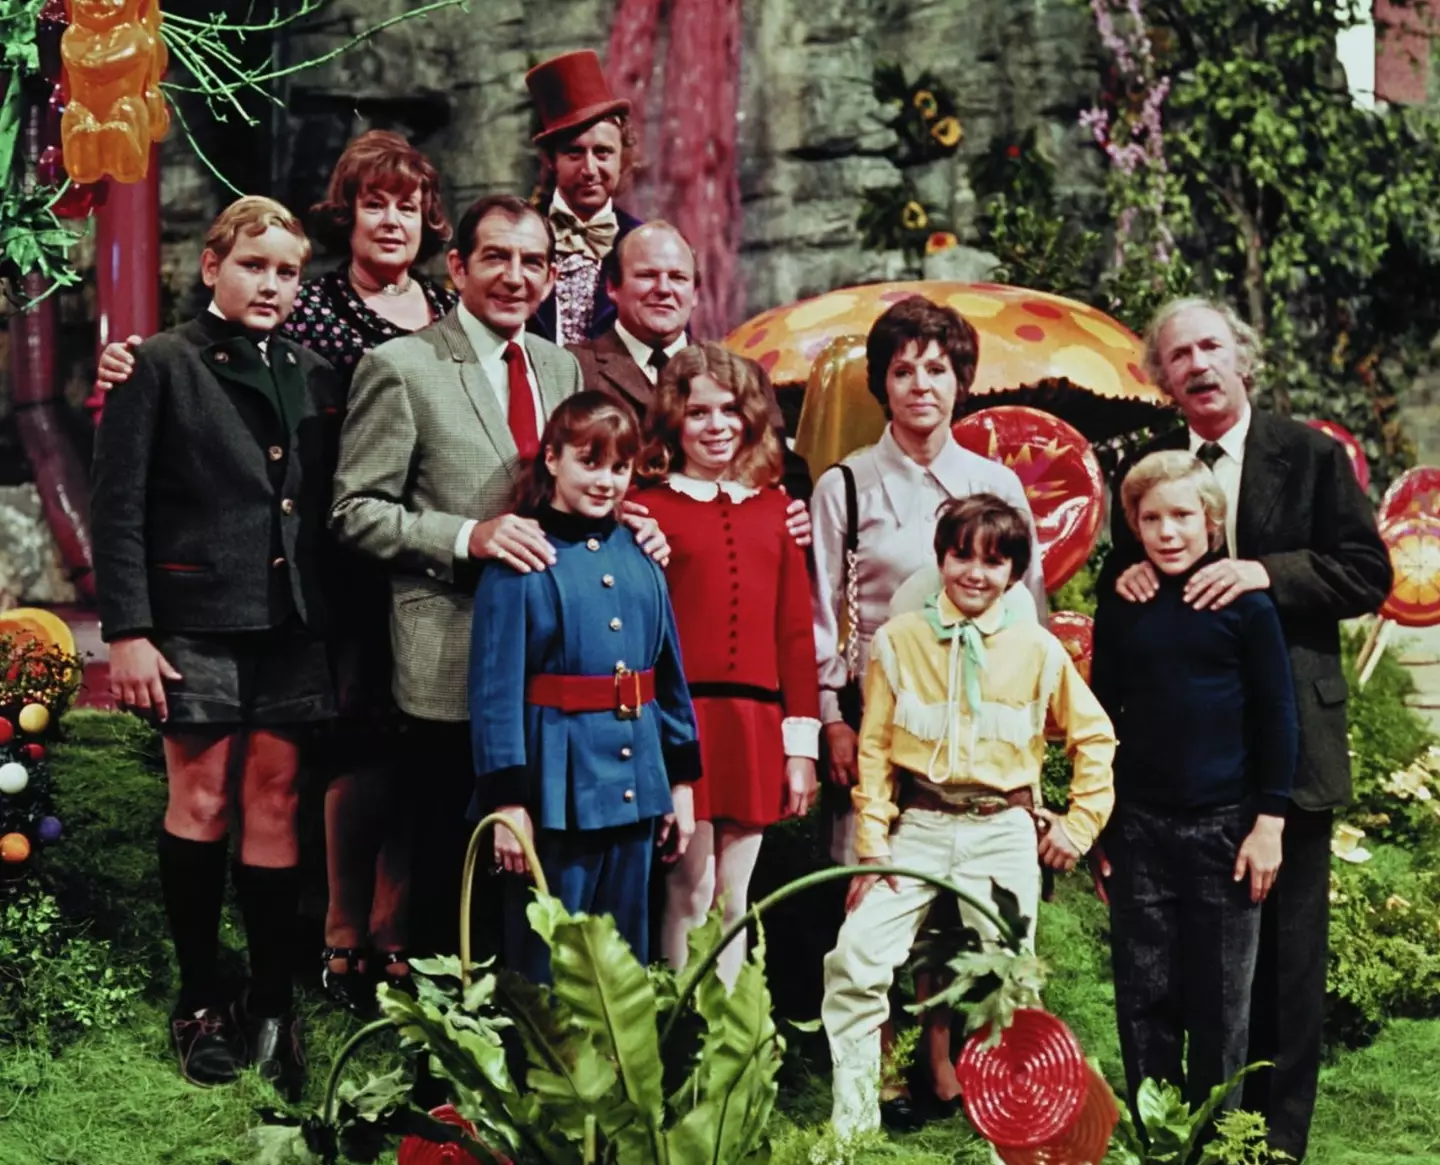 Gene Wilder and the cast of Willy Wonka.